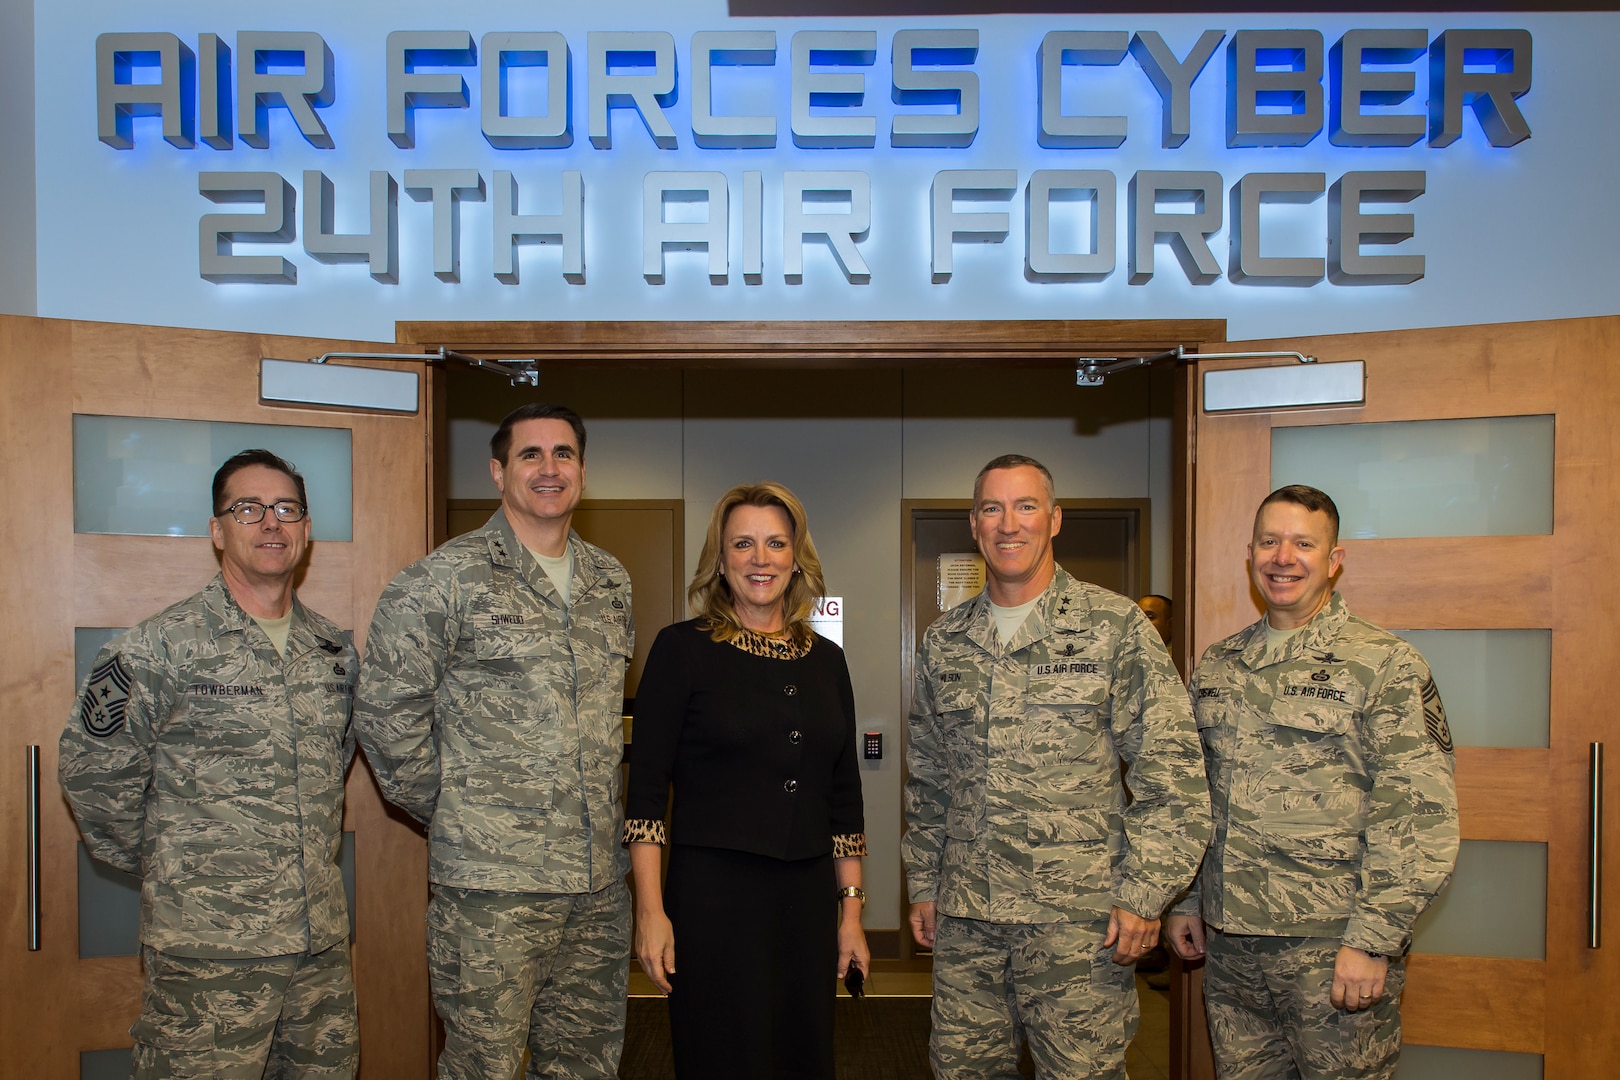 Secretary of the Air Force Deborah Lee James (center) poses with senior leaders from 24th and 25th Air Force during a visit at Joint Base San Antonio - Lackland, Texas Jan 5.  With James is Command Chief Master Sgt. Roger Towberman, 25th Air Force (left), Maj. Gen. B.J. Shwedo, 25th Air Force commander, Maj. Gen. Ed Wilson, 24th Air Force commander, and Command Chief Master Sgt. Brendan Criswell, 24th Air Force (right). (US Air Force photo by MSgt Luke Thelen) 